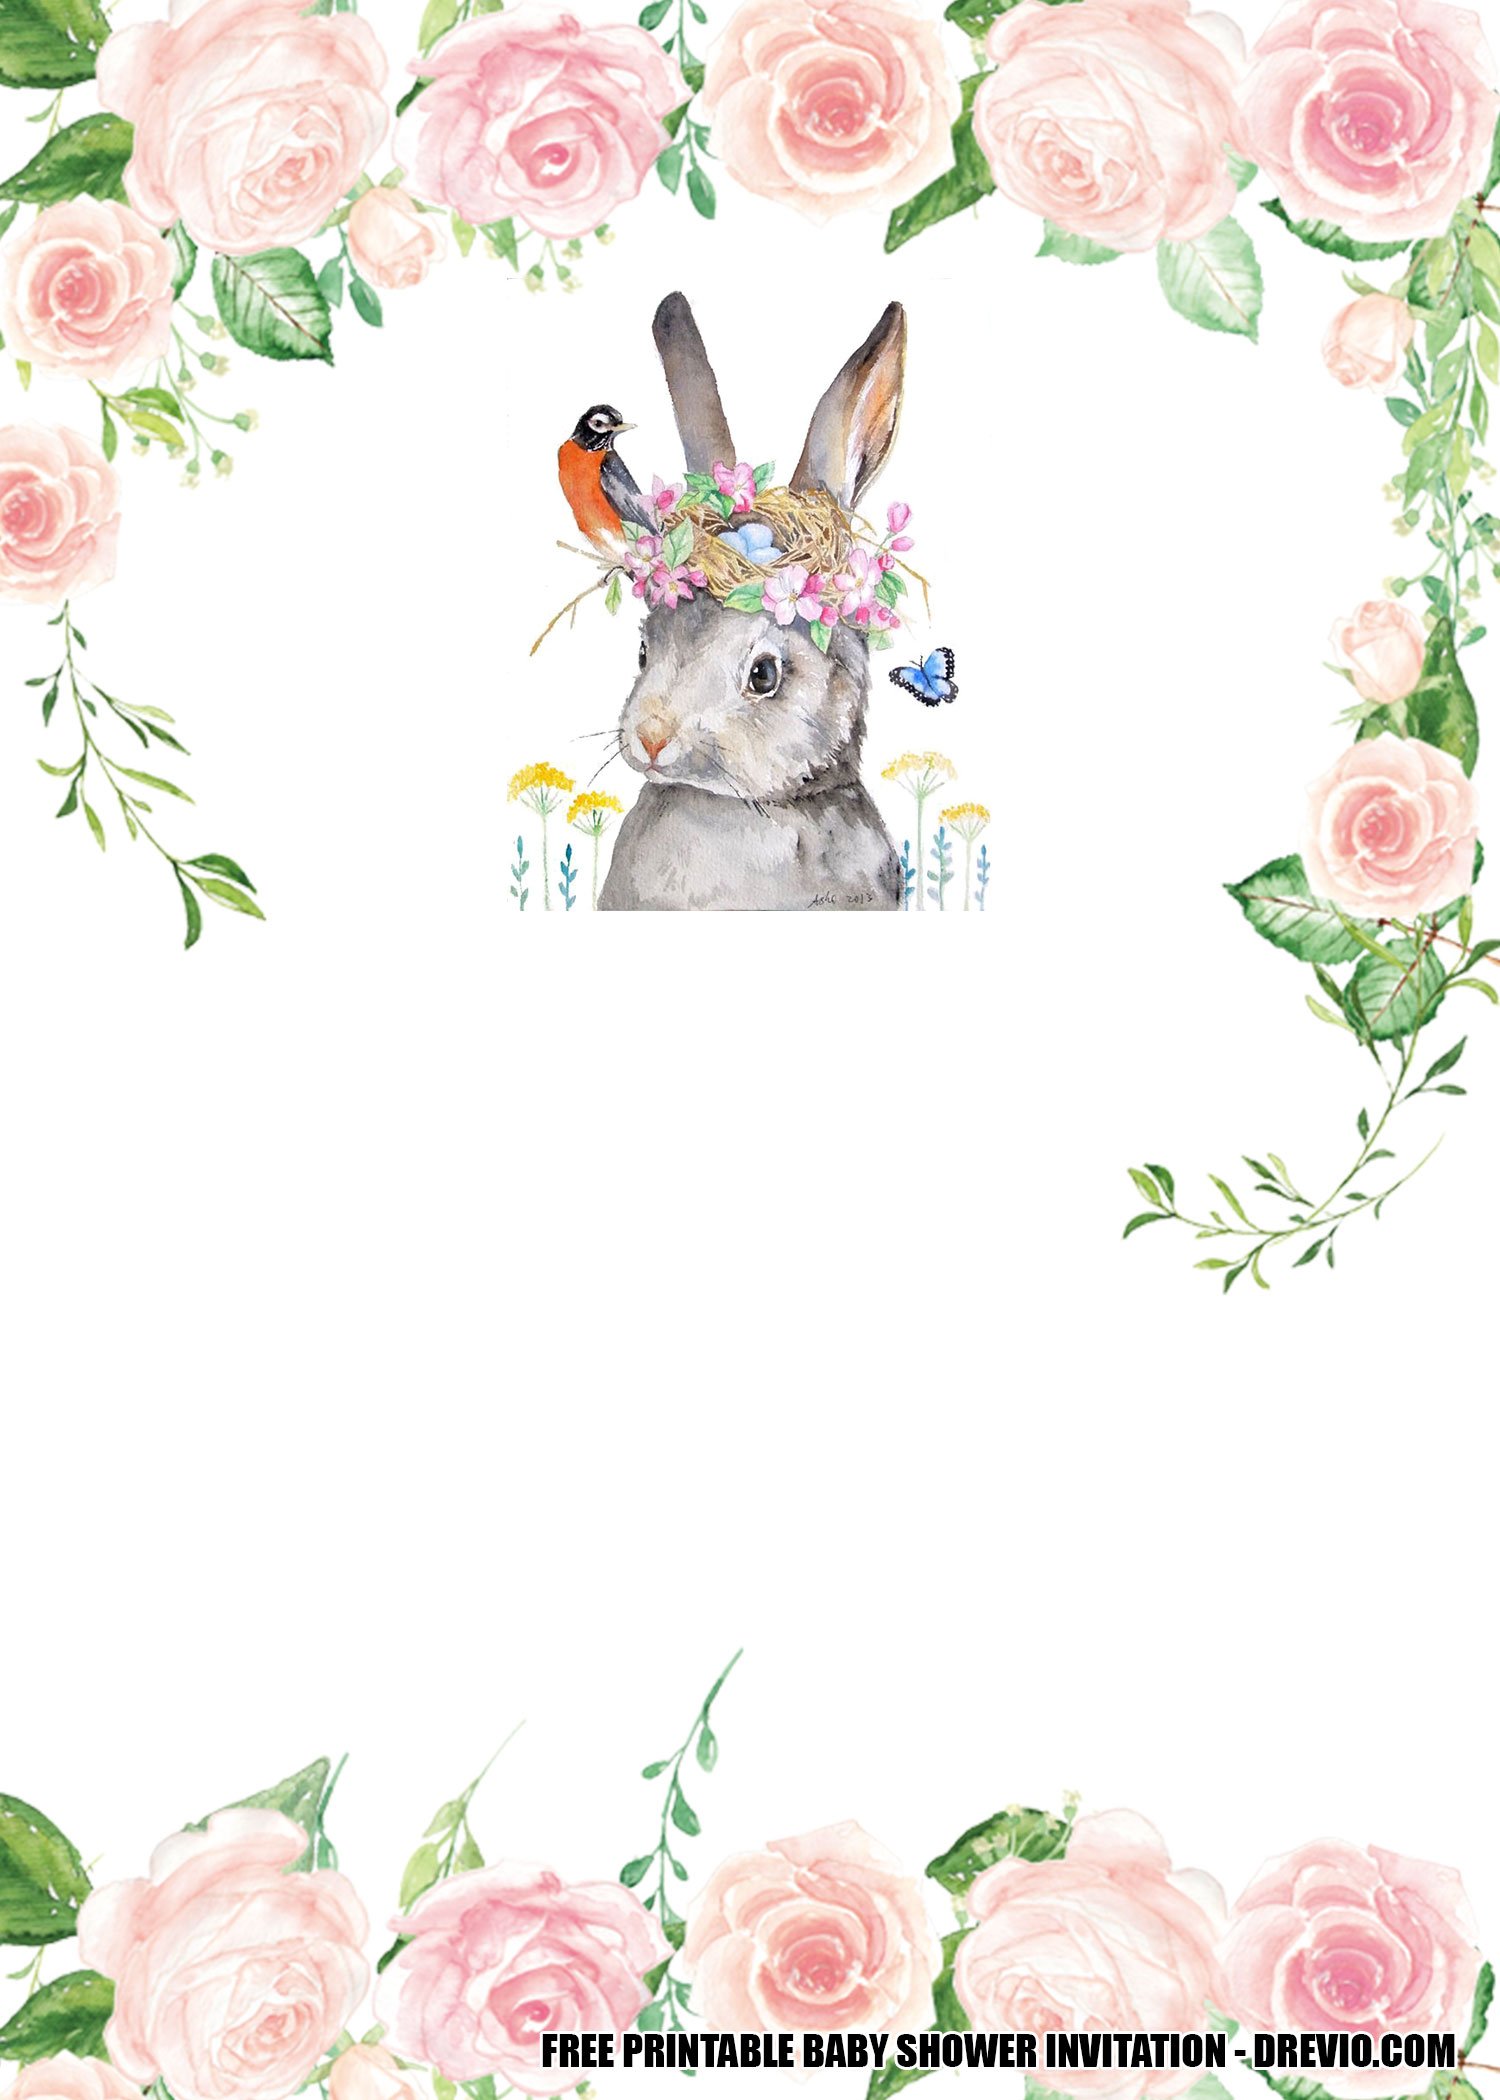 free-printable-template-some-bunny-is-one-birthday-invitation-in